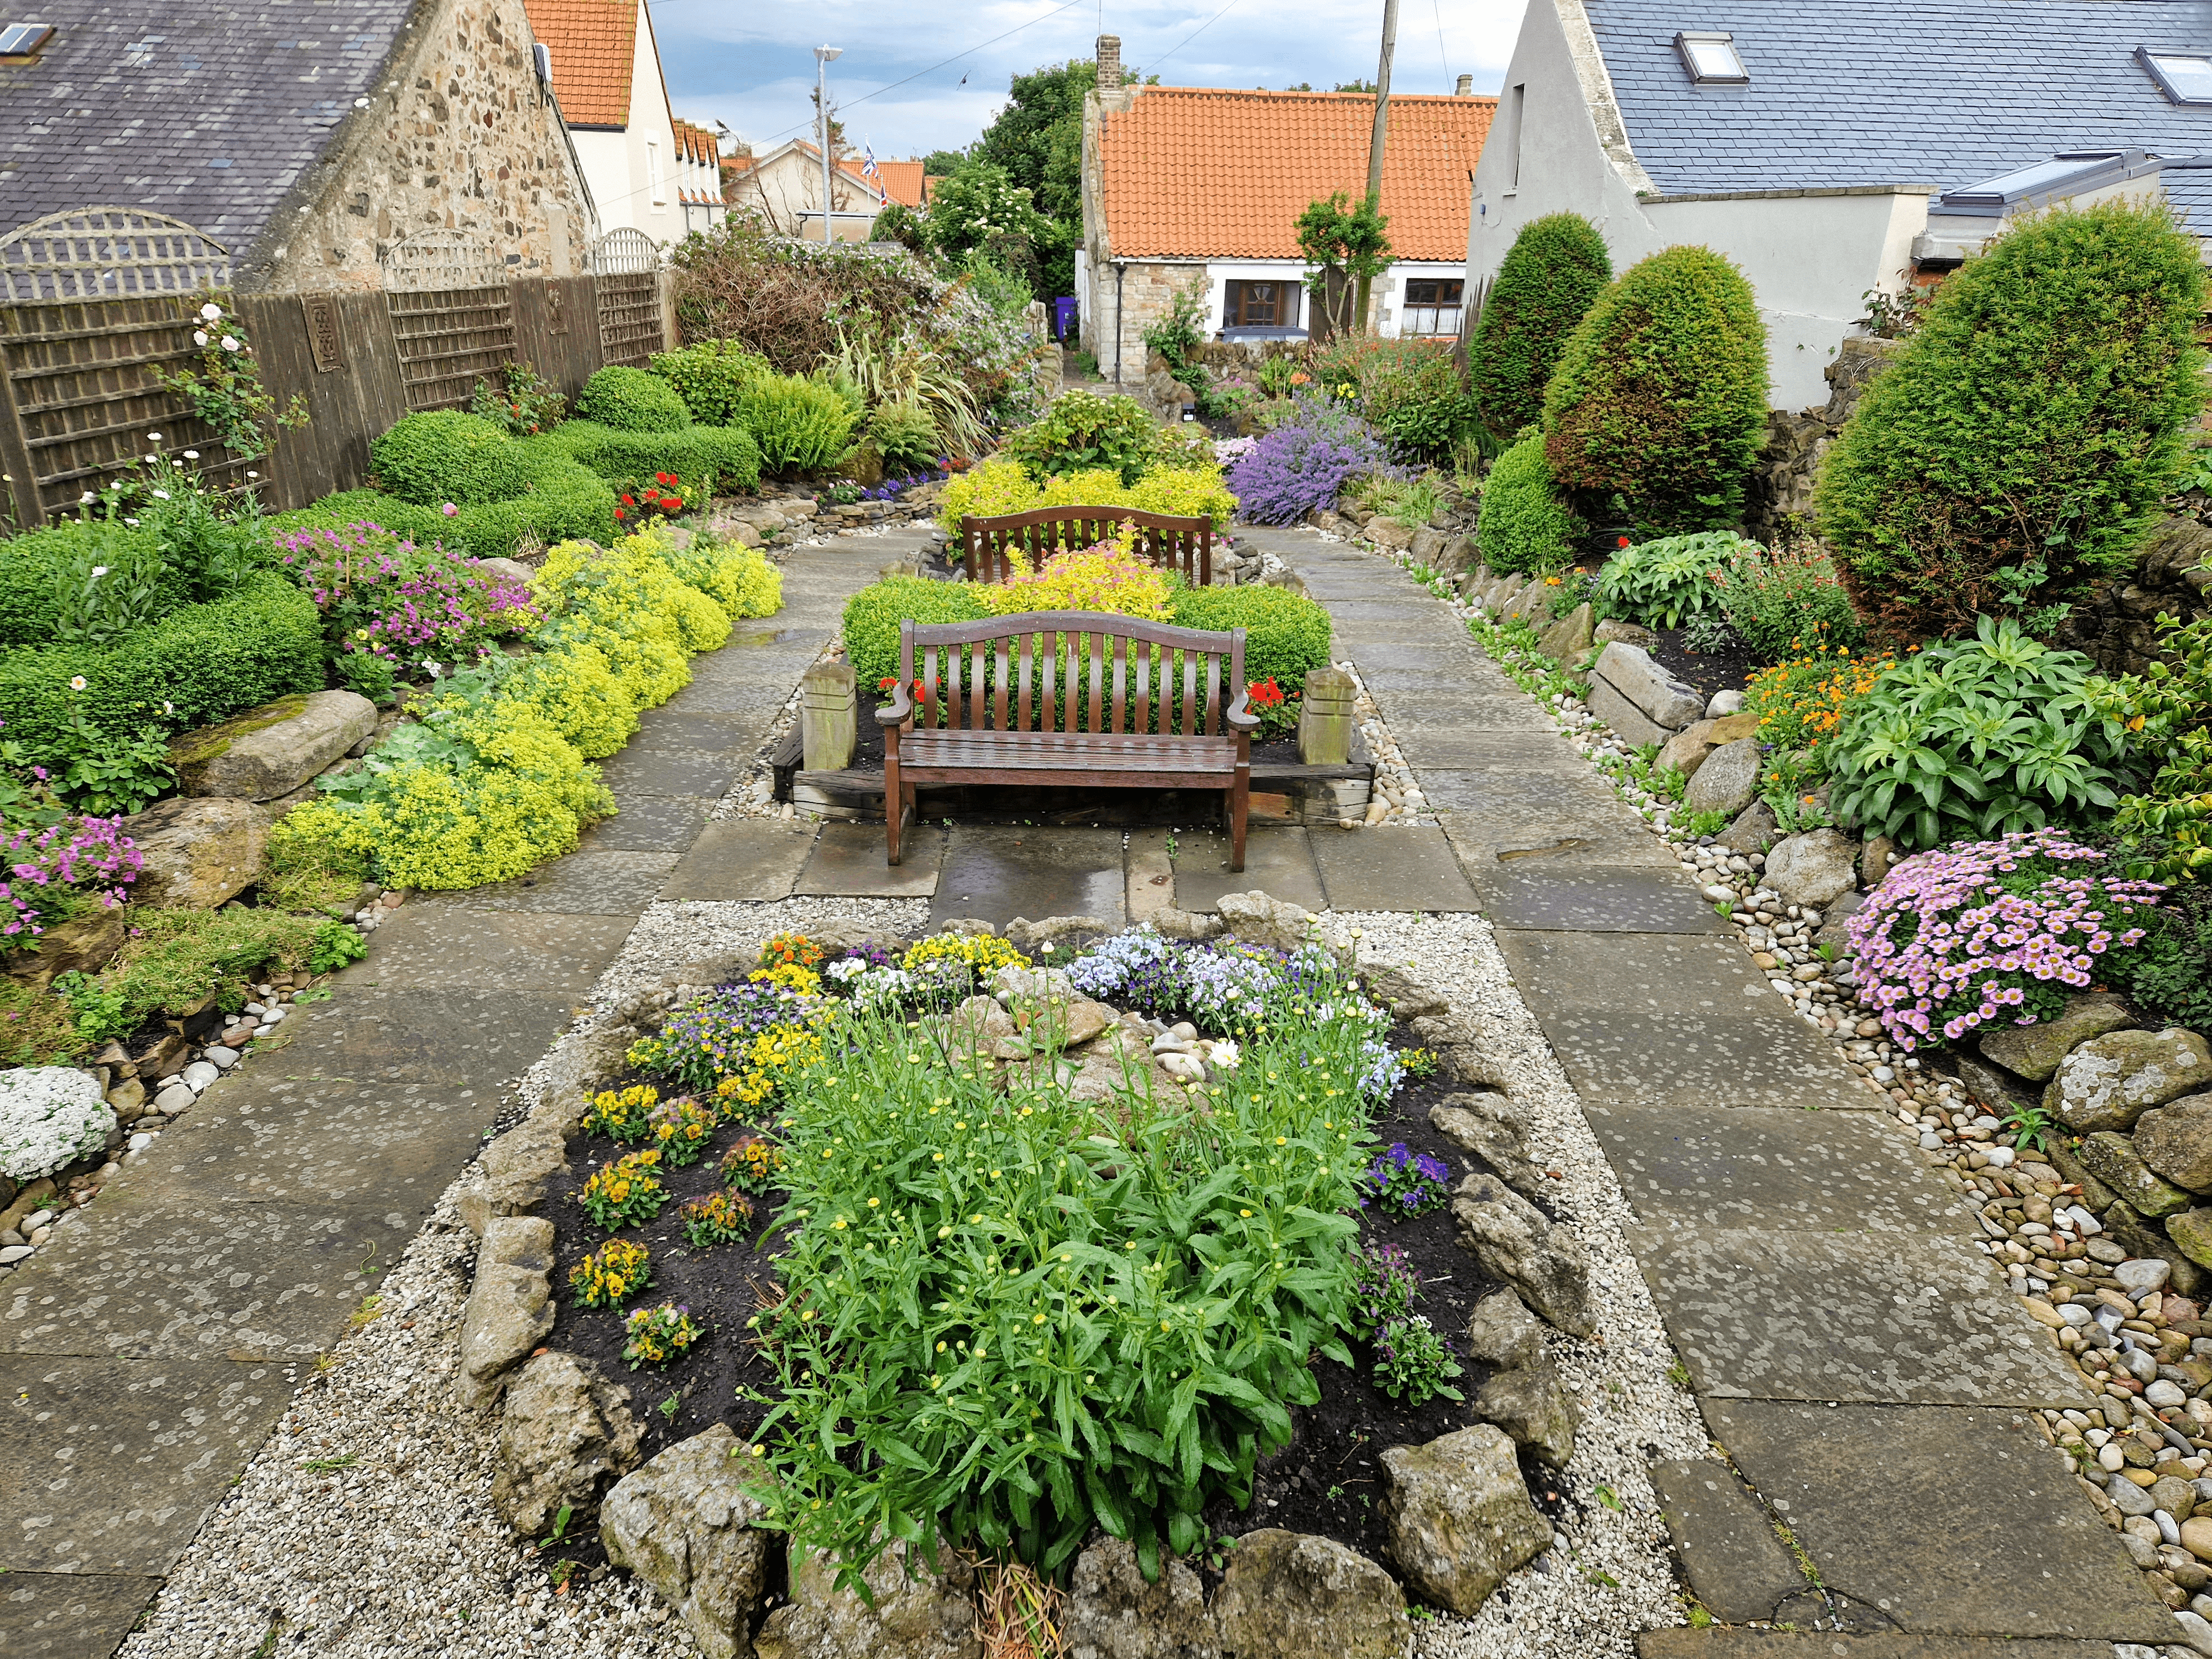 Lindisfarne Gospel Garden with benches and flora